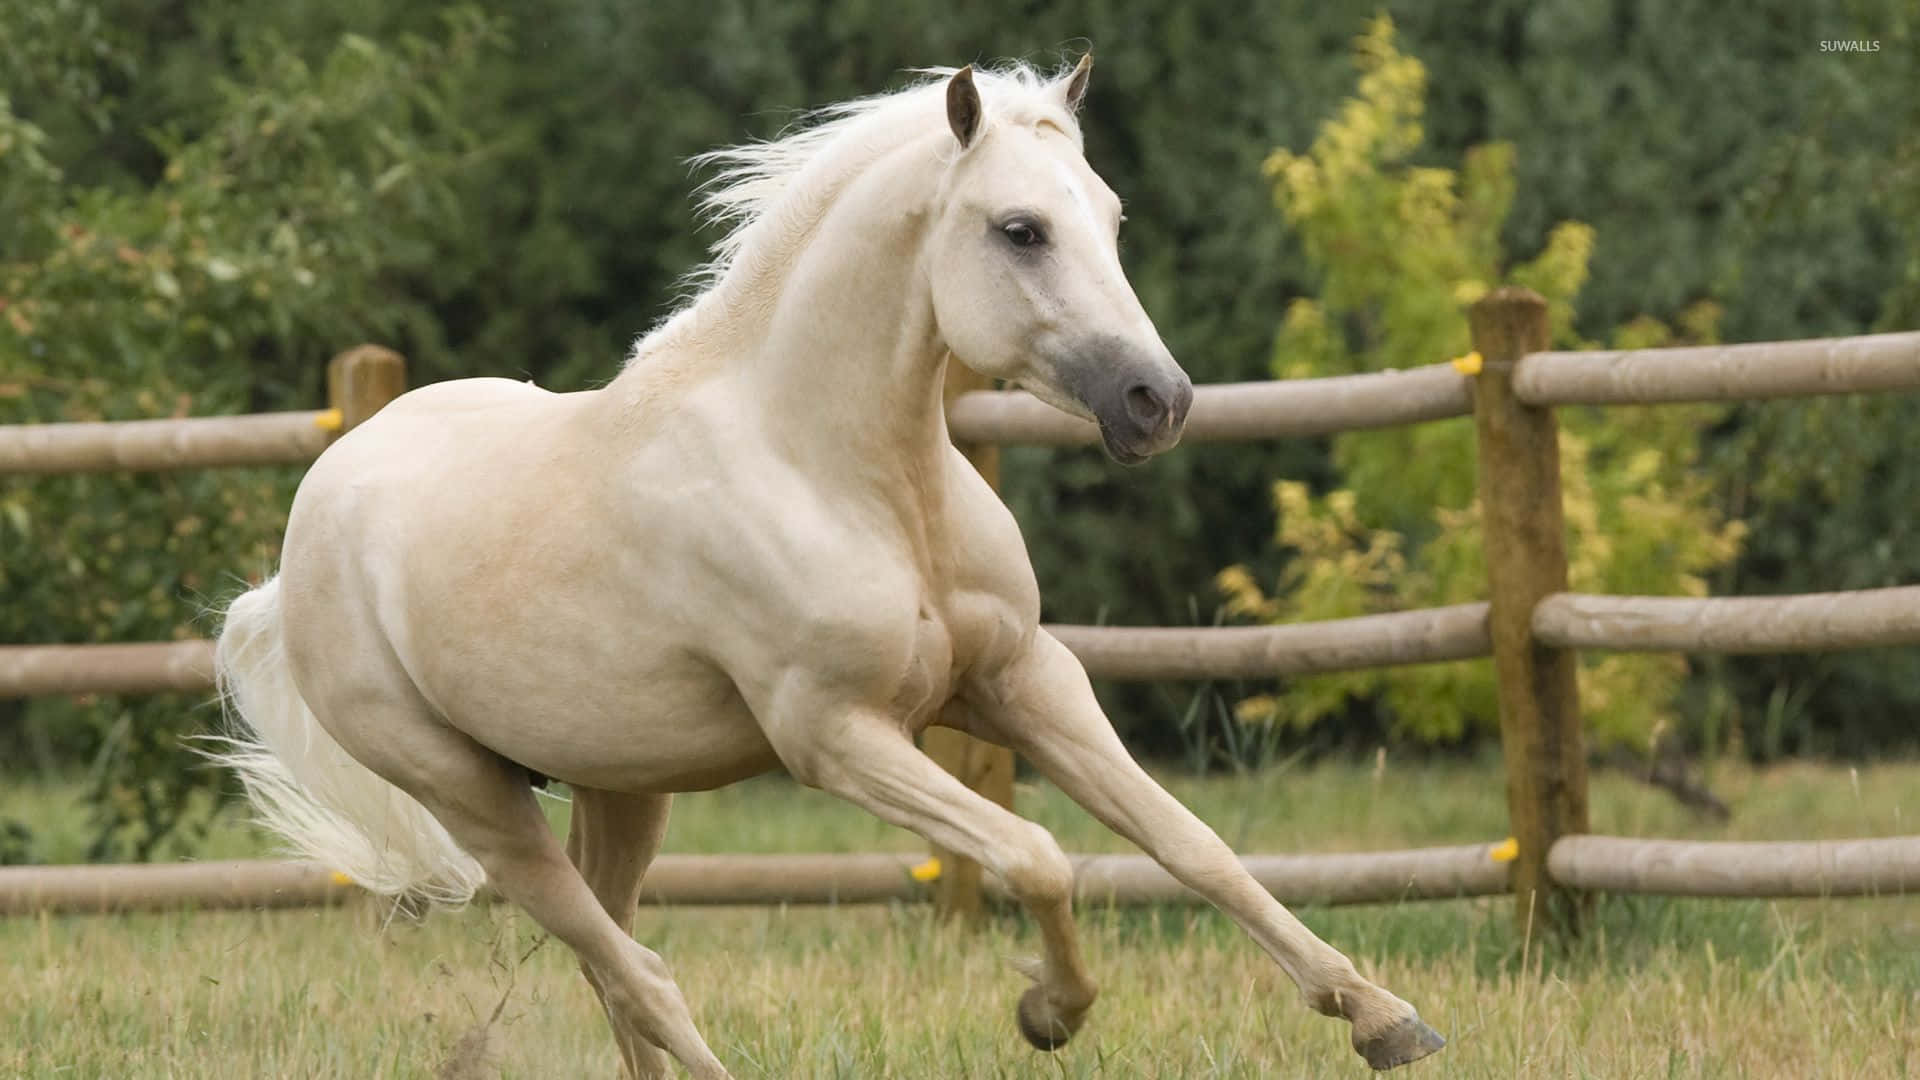 Beautiful Horse Running In The Yard Picture